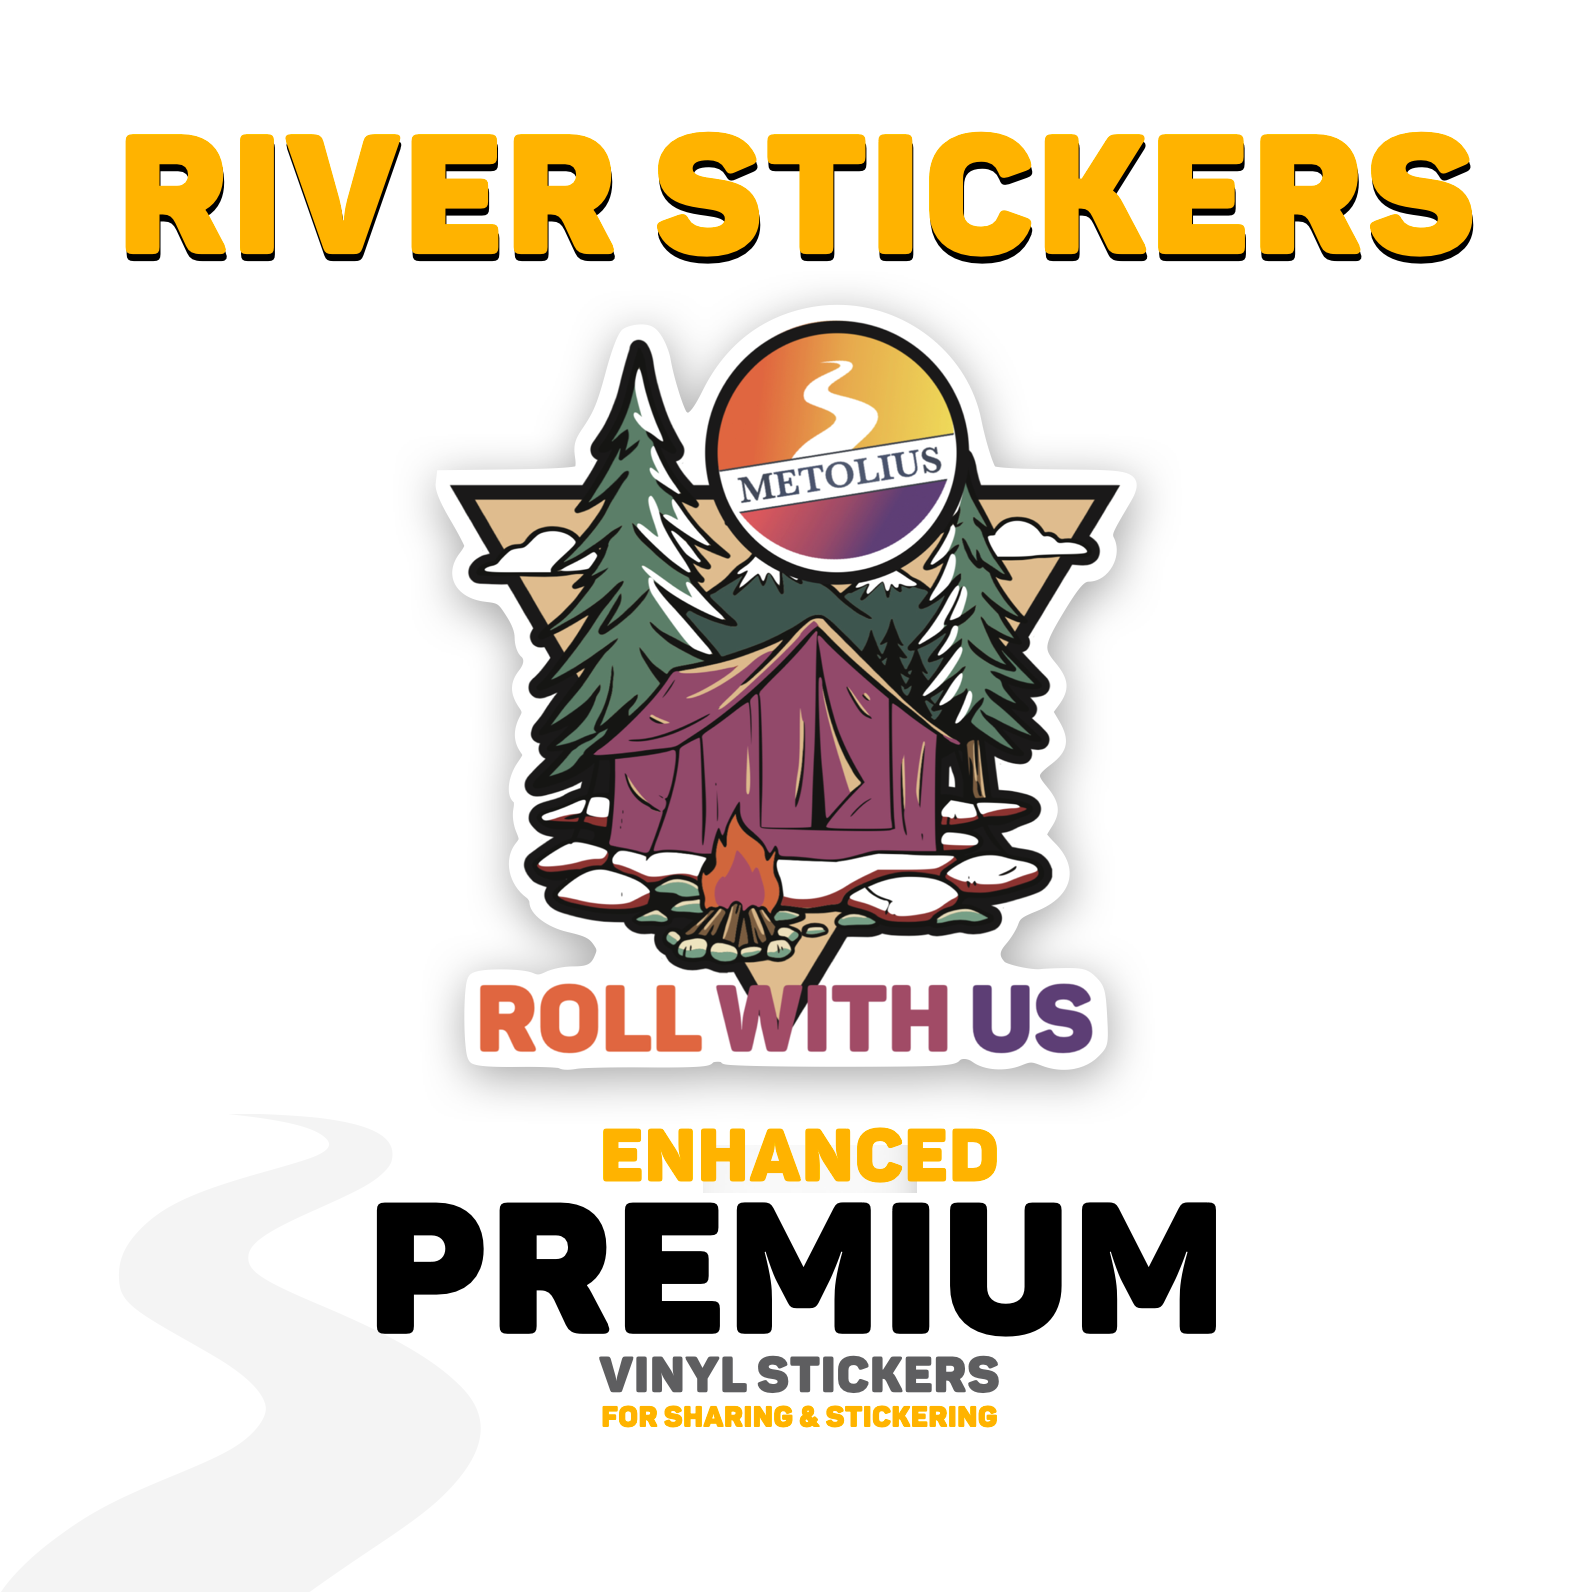 RIVER STICKERS - ROLL WITH US COLLECTION